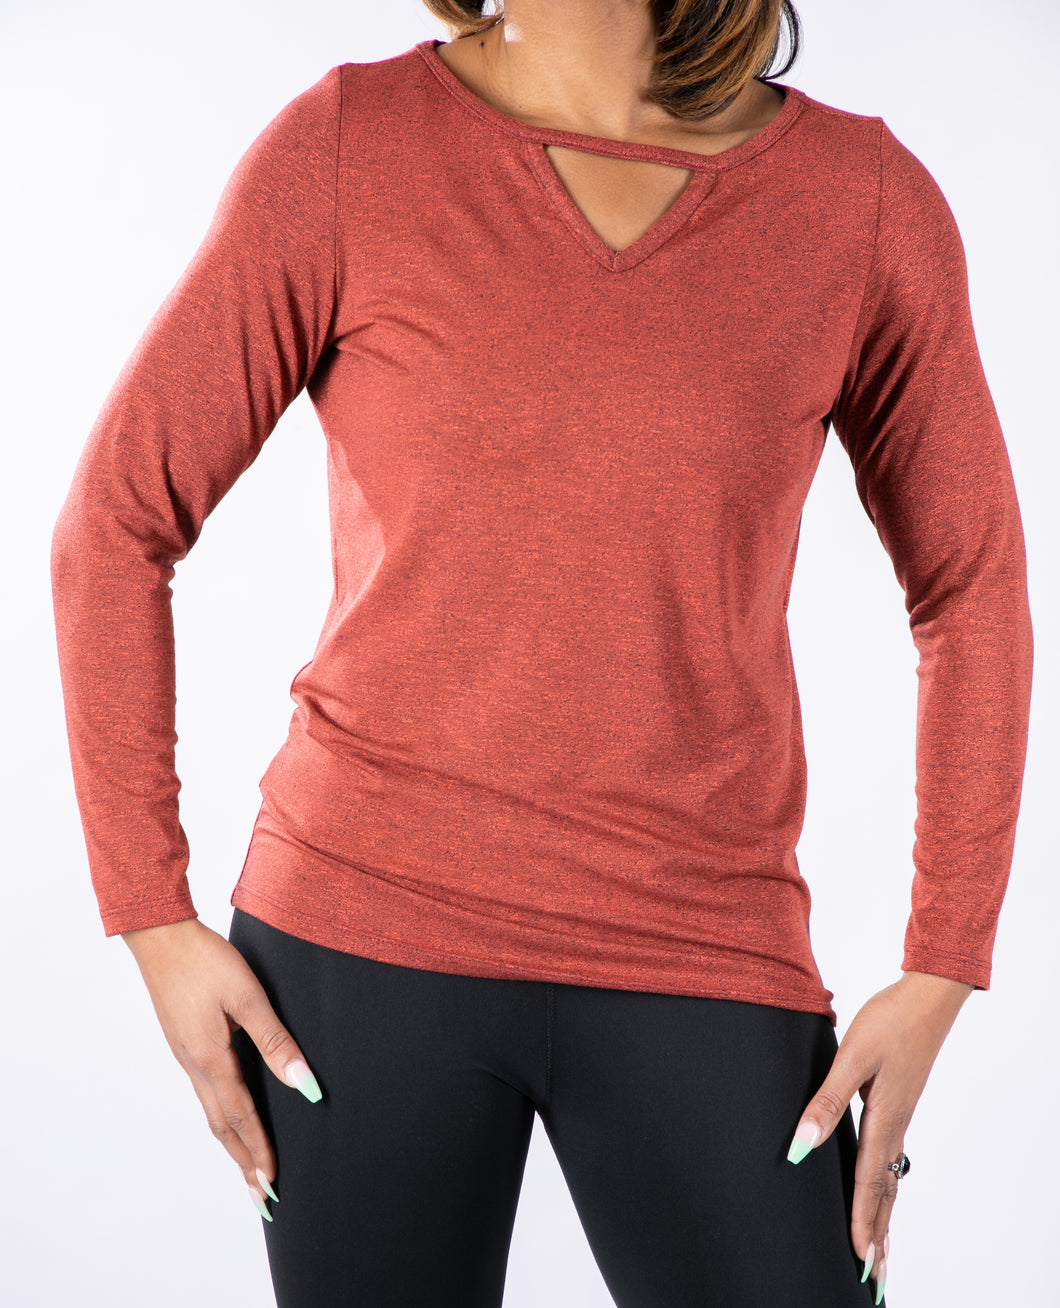 Top, Paprika and/or Sapphire (boat neck with V-detail, long sleeves)